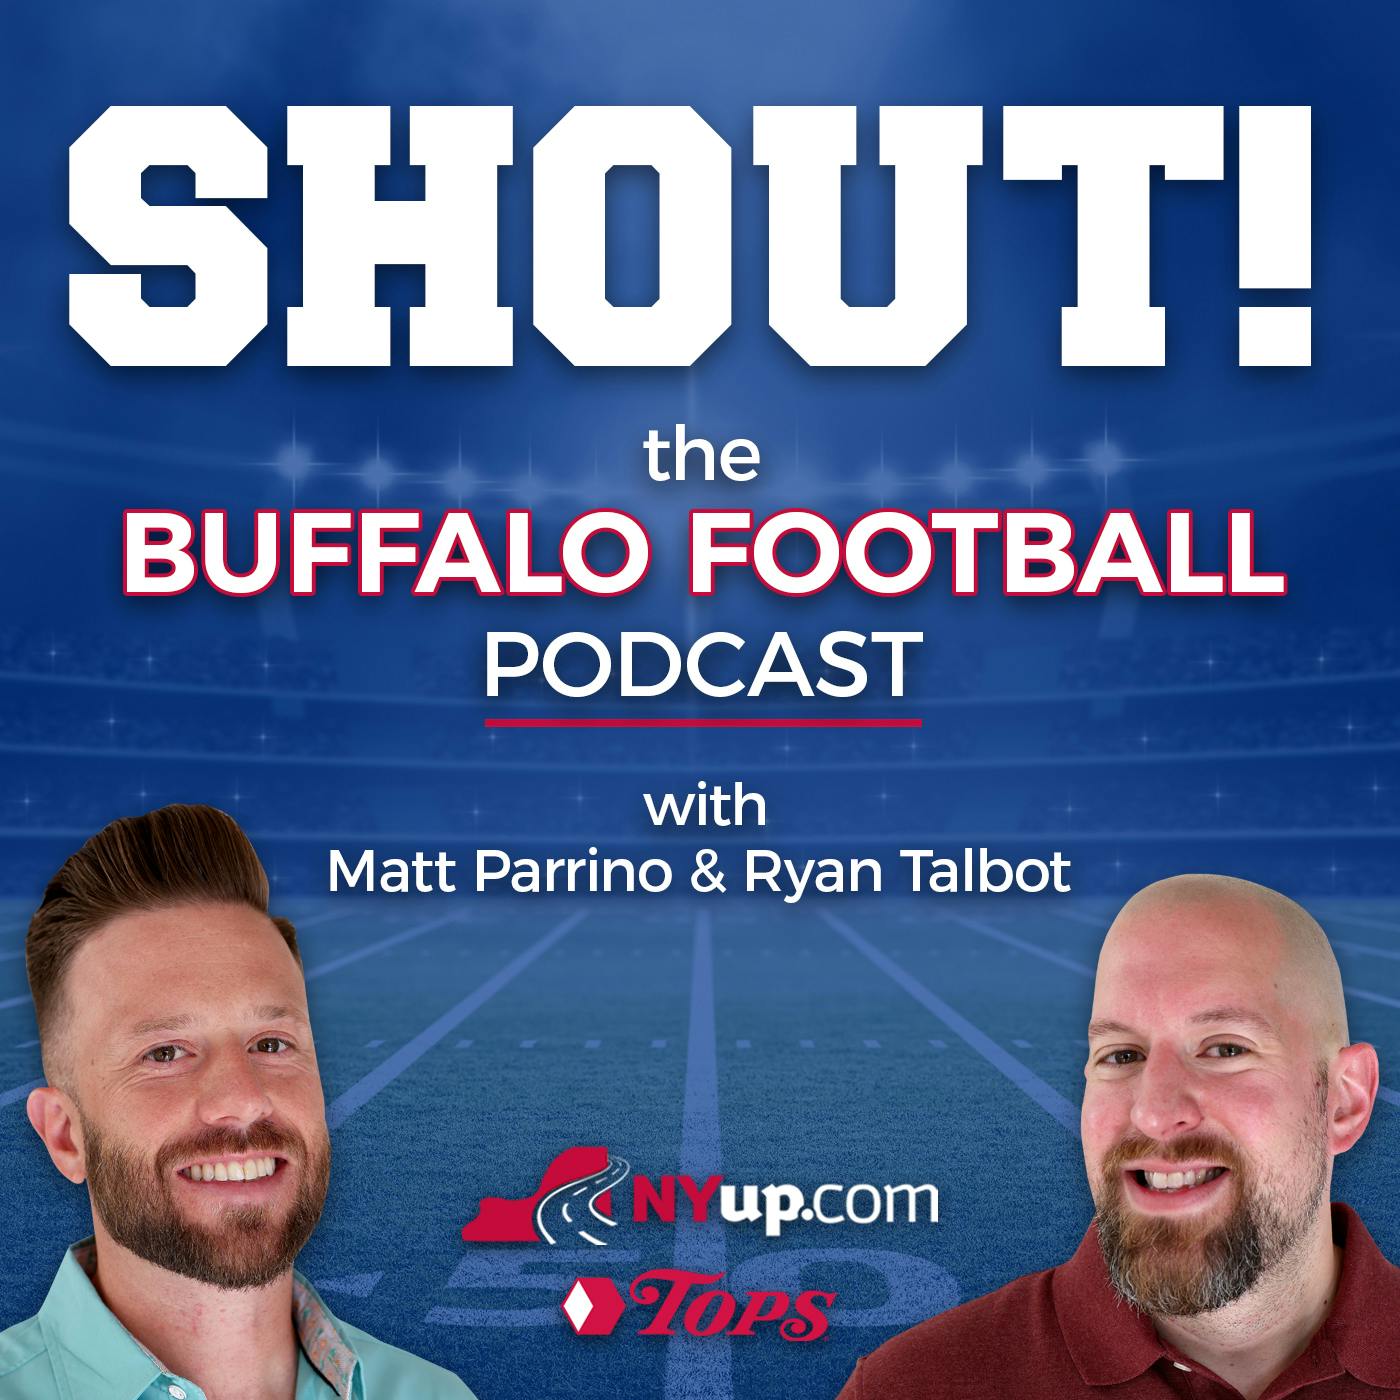 Who should the Bills take if they trade up for WR? Draft guru Dane Brugler talks Buffalo's options and reveals pick for the Bills in his 7-round mock